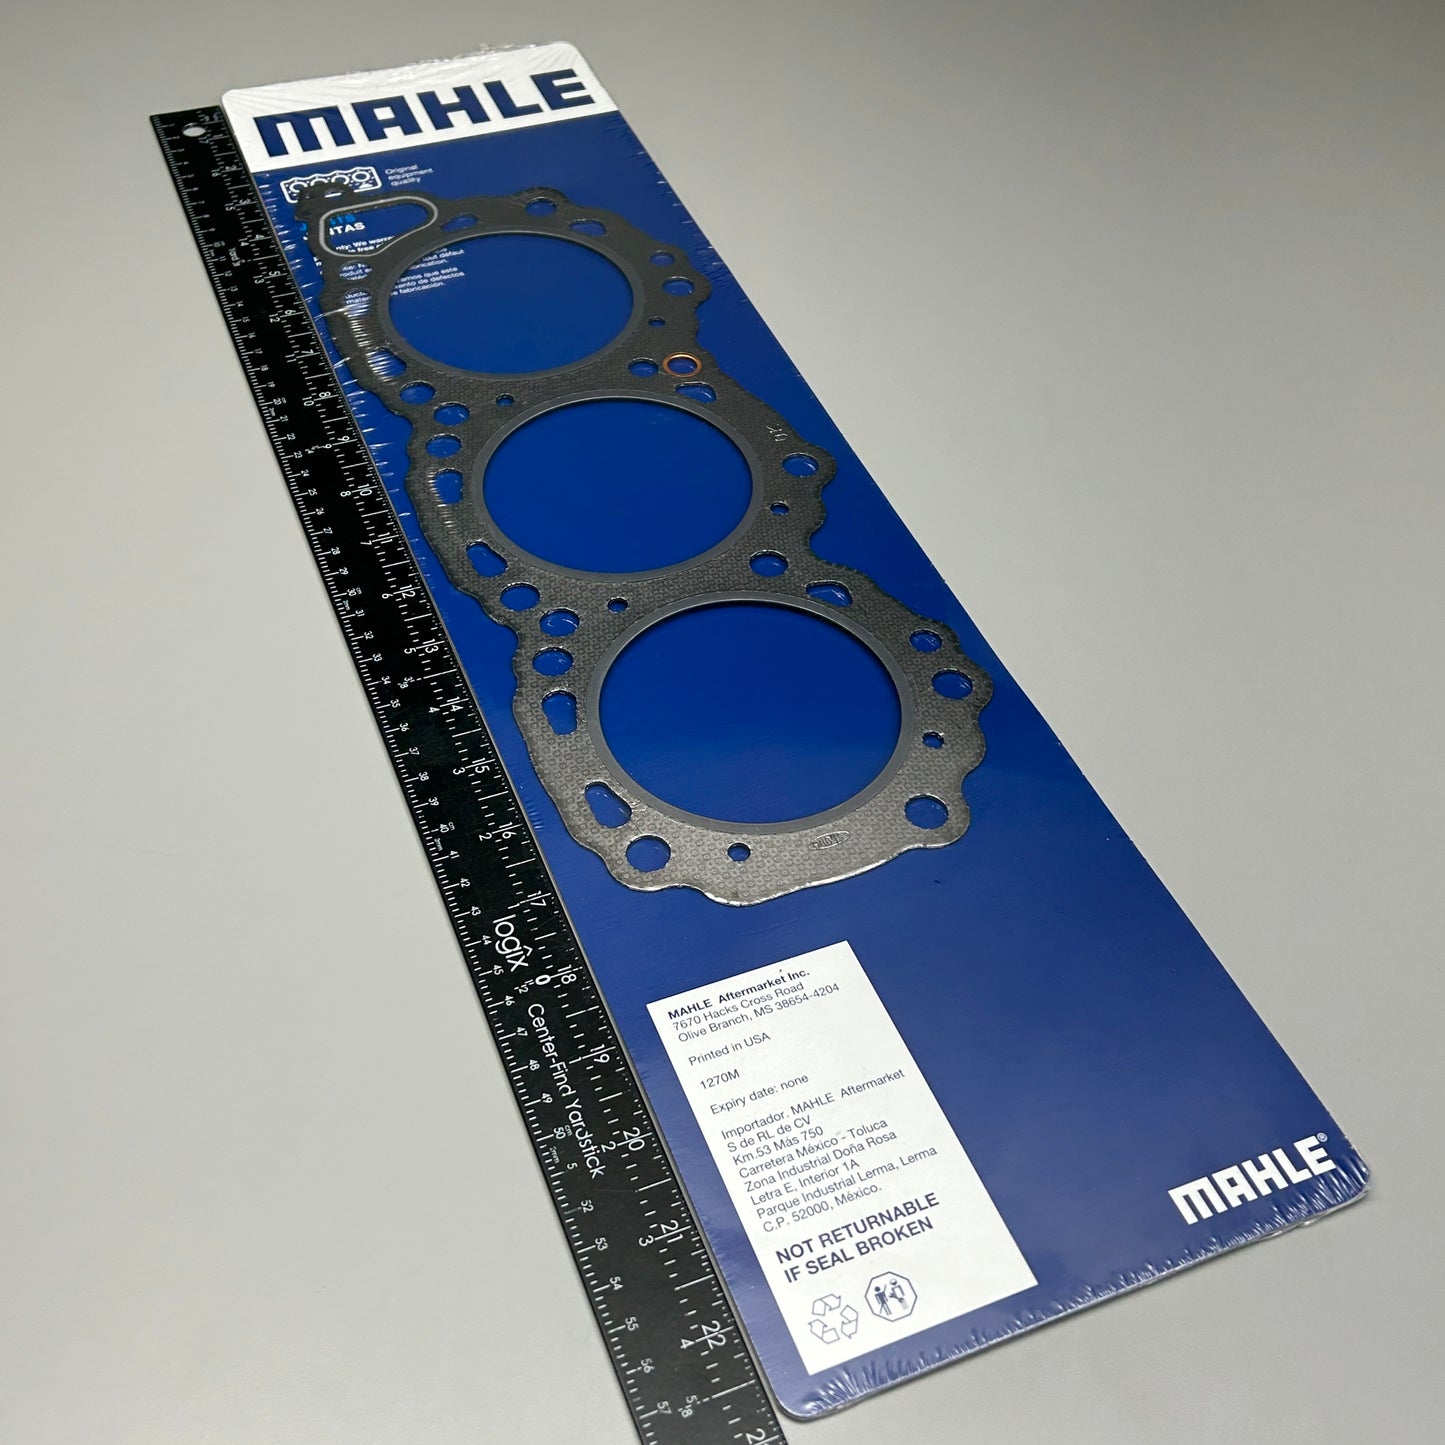 MAHLE Cylinder Head Gasket for Nissan 5758 (New)